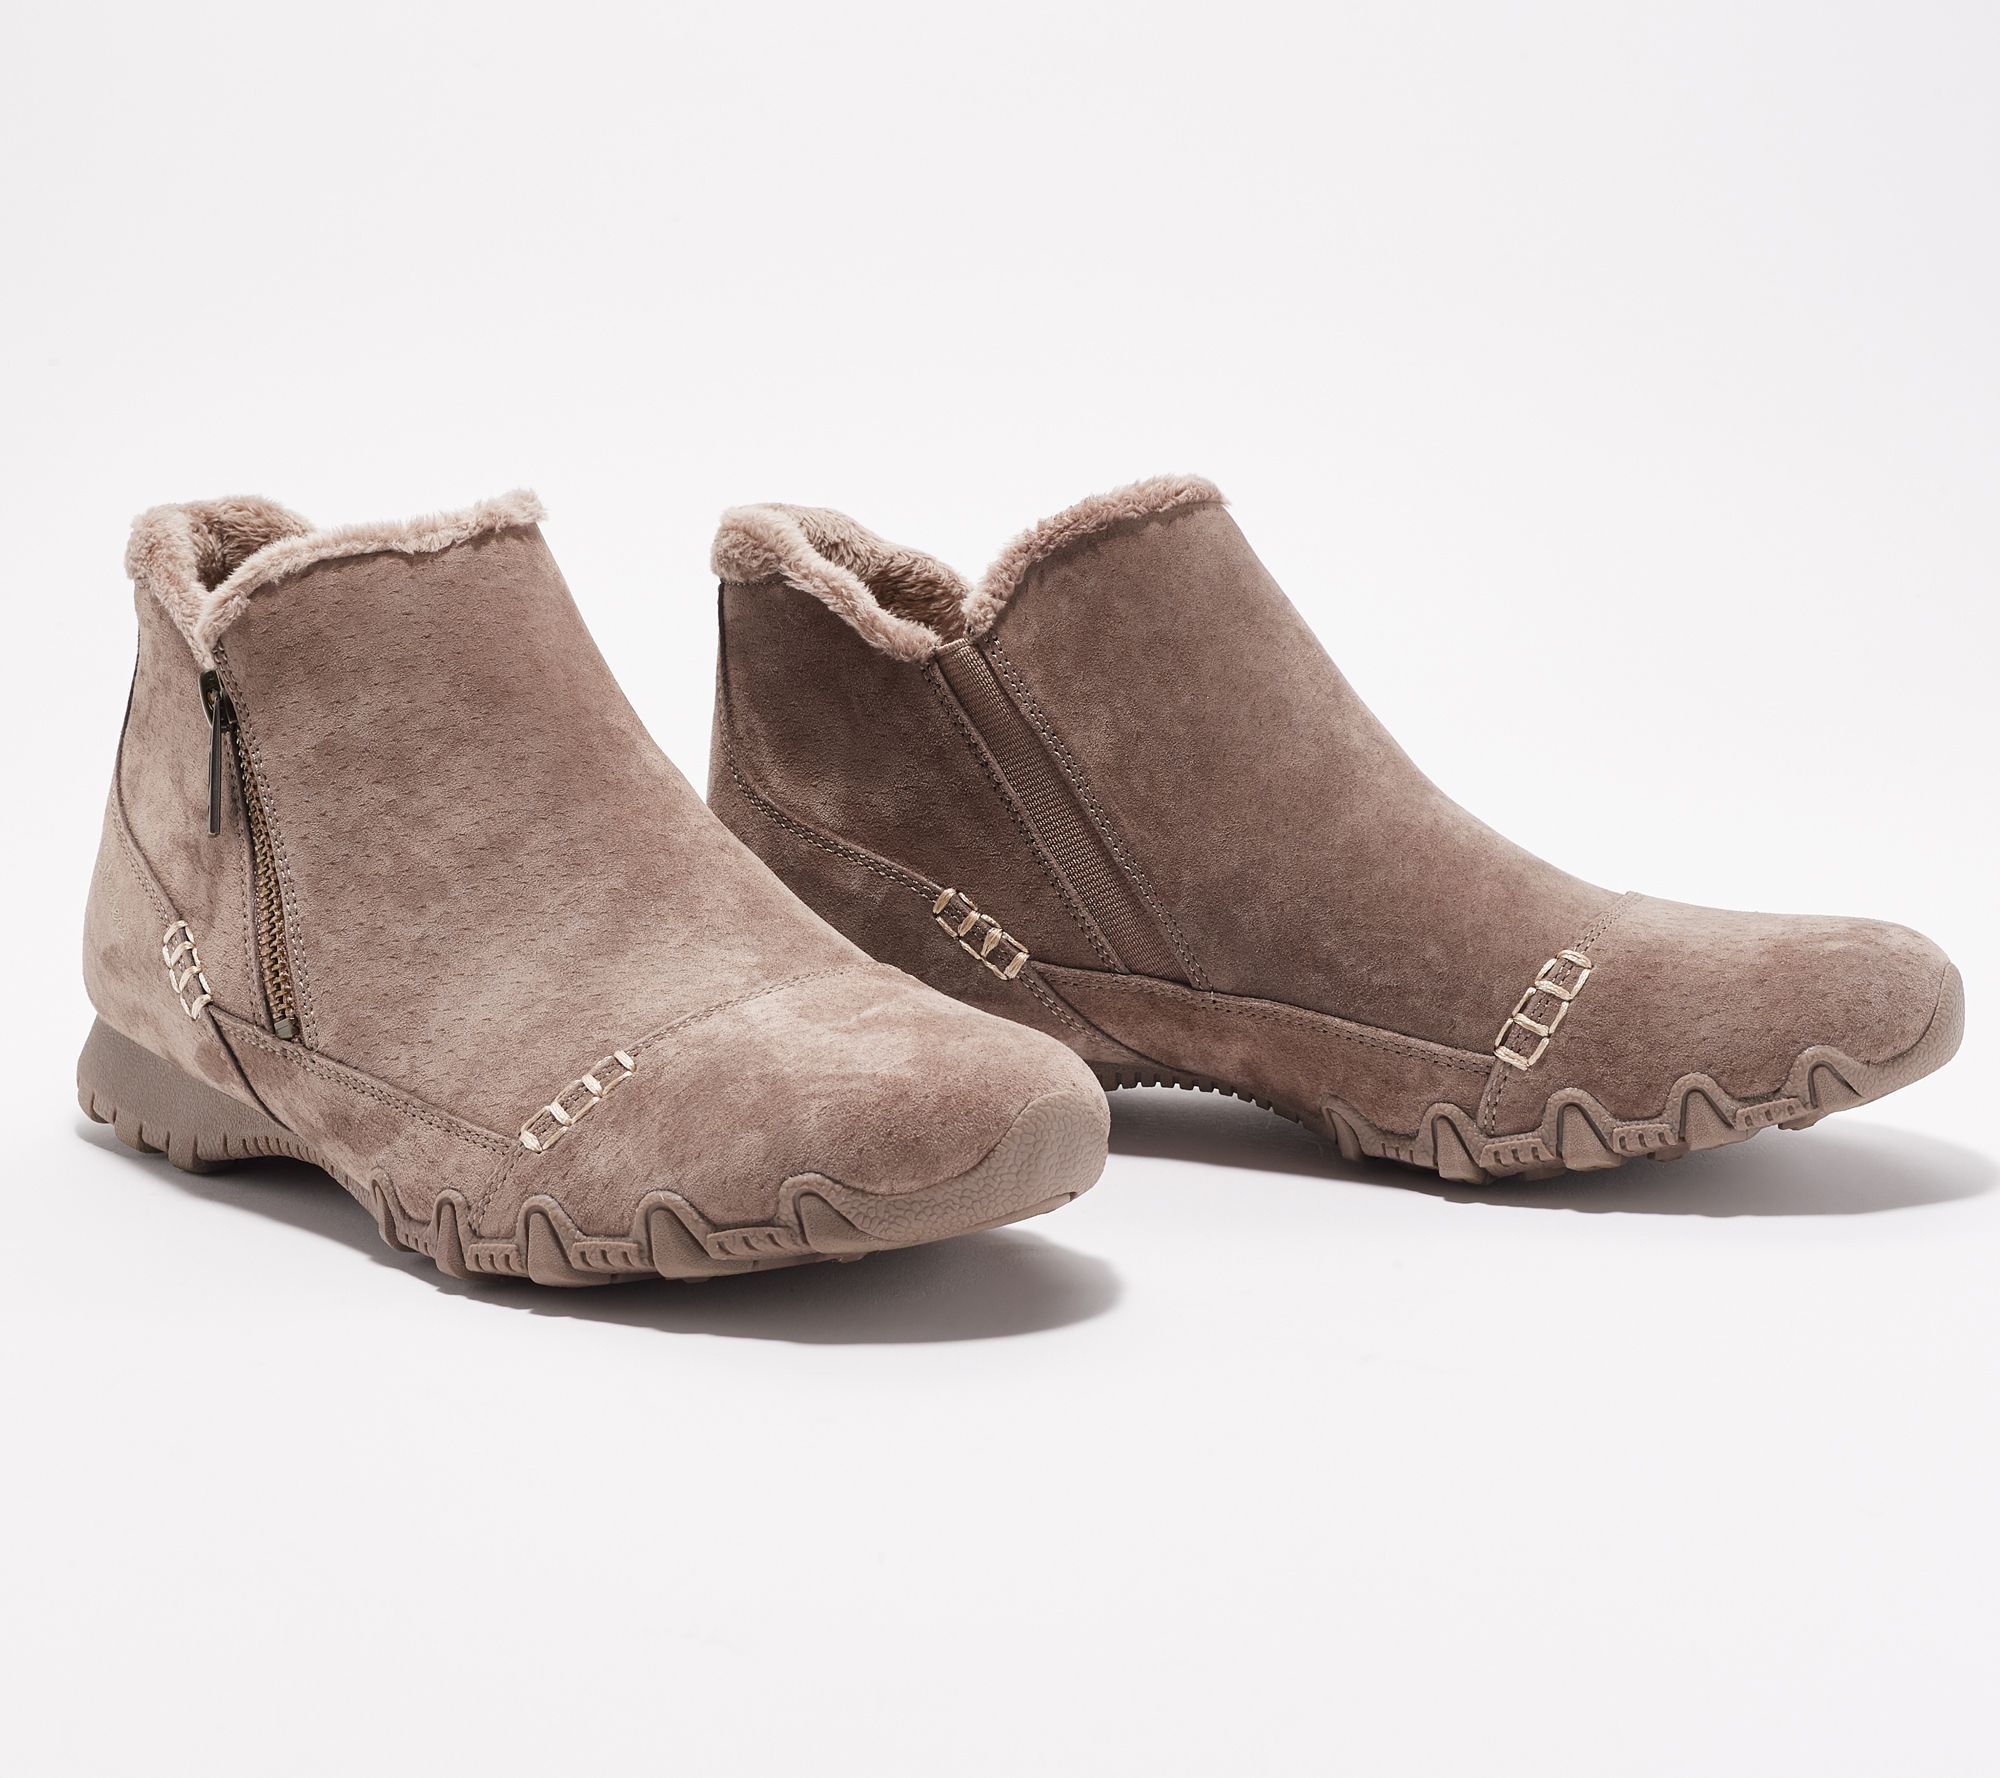 Skechers Relaxed Fit Suede Biker Ankle Boots - Earthy Chic QVC.com